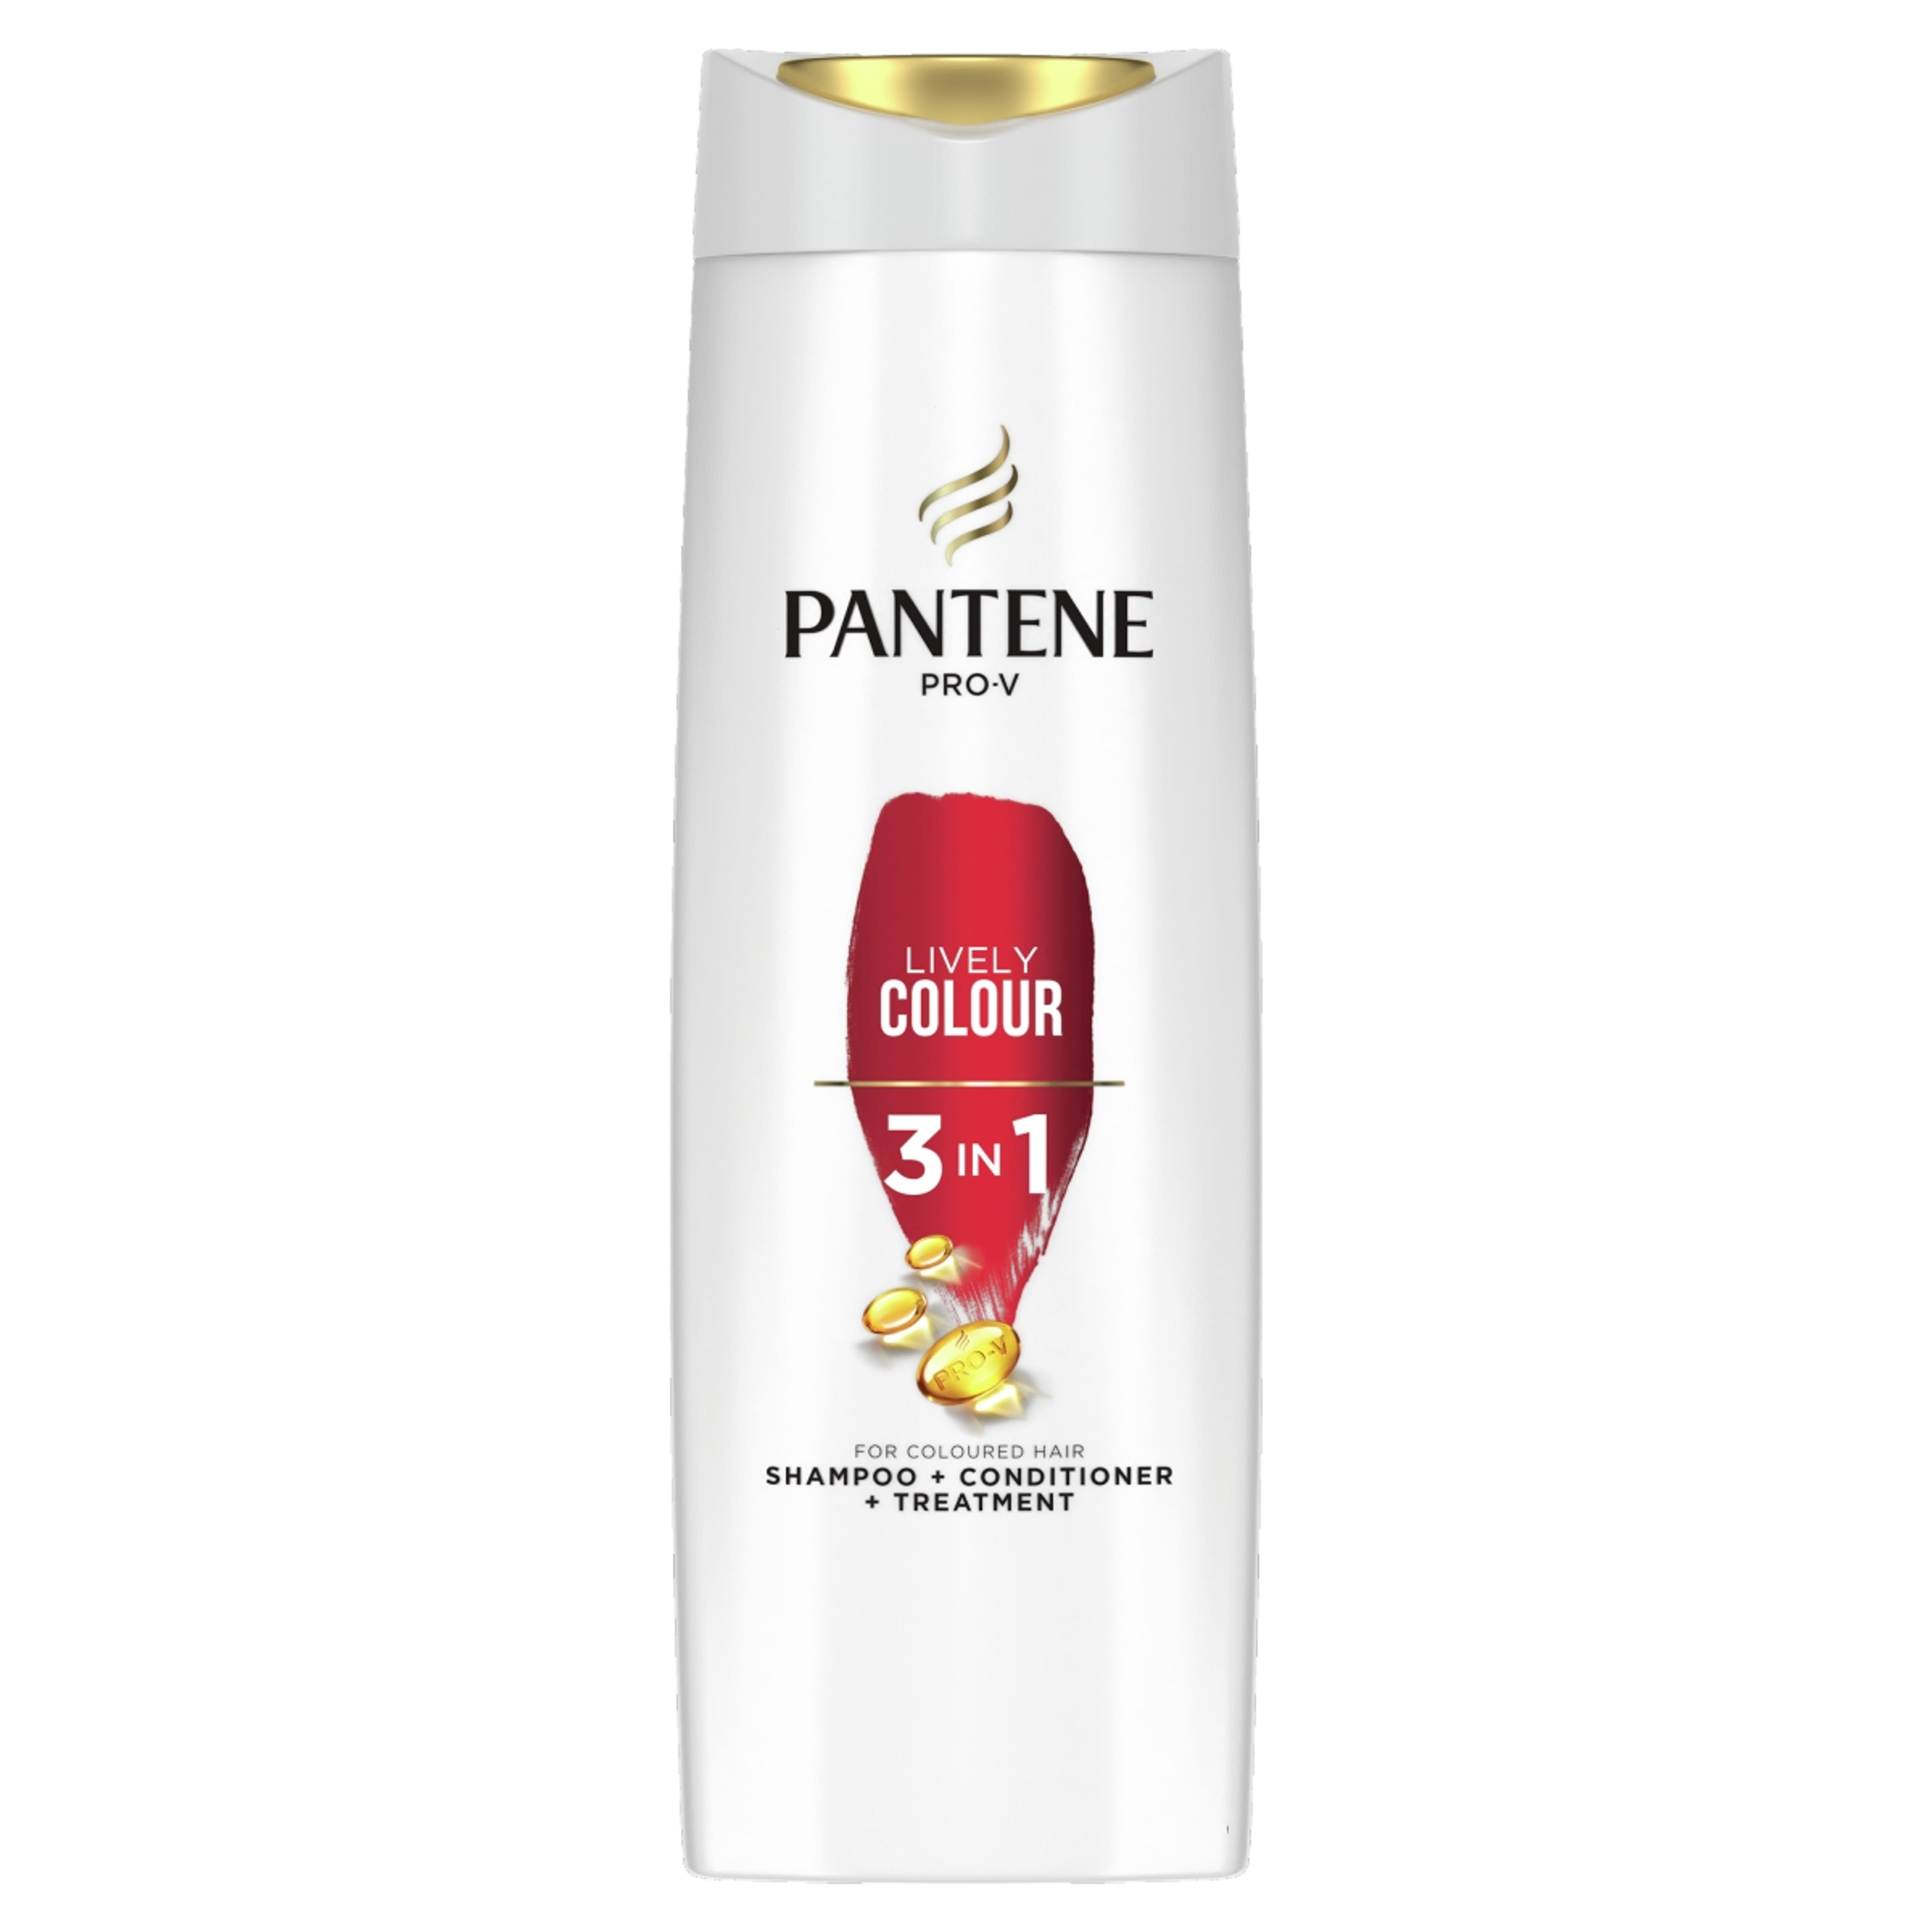 Pantene 3in1 Lively Color sampon - 360 ml-1